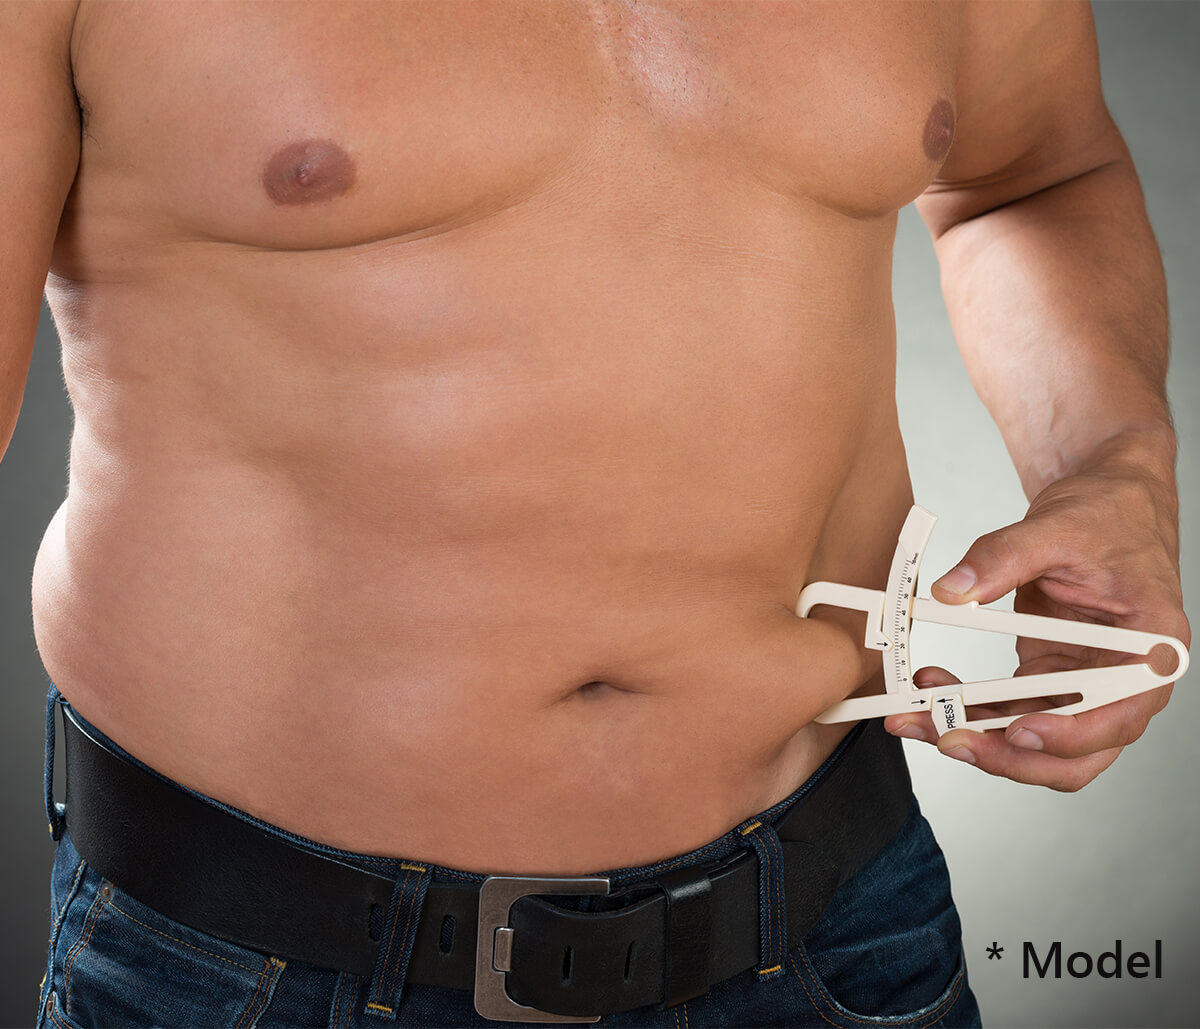 Tummy Tuck for Men in Beverly Hills Area